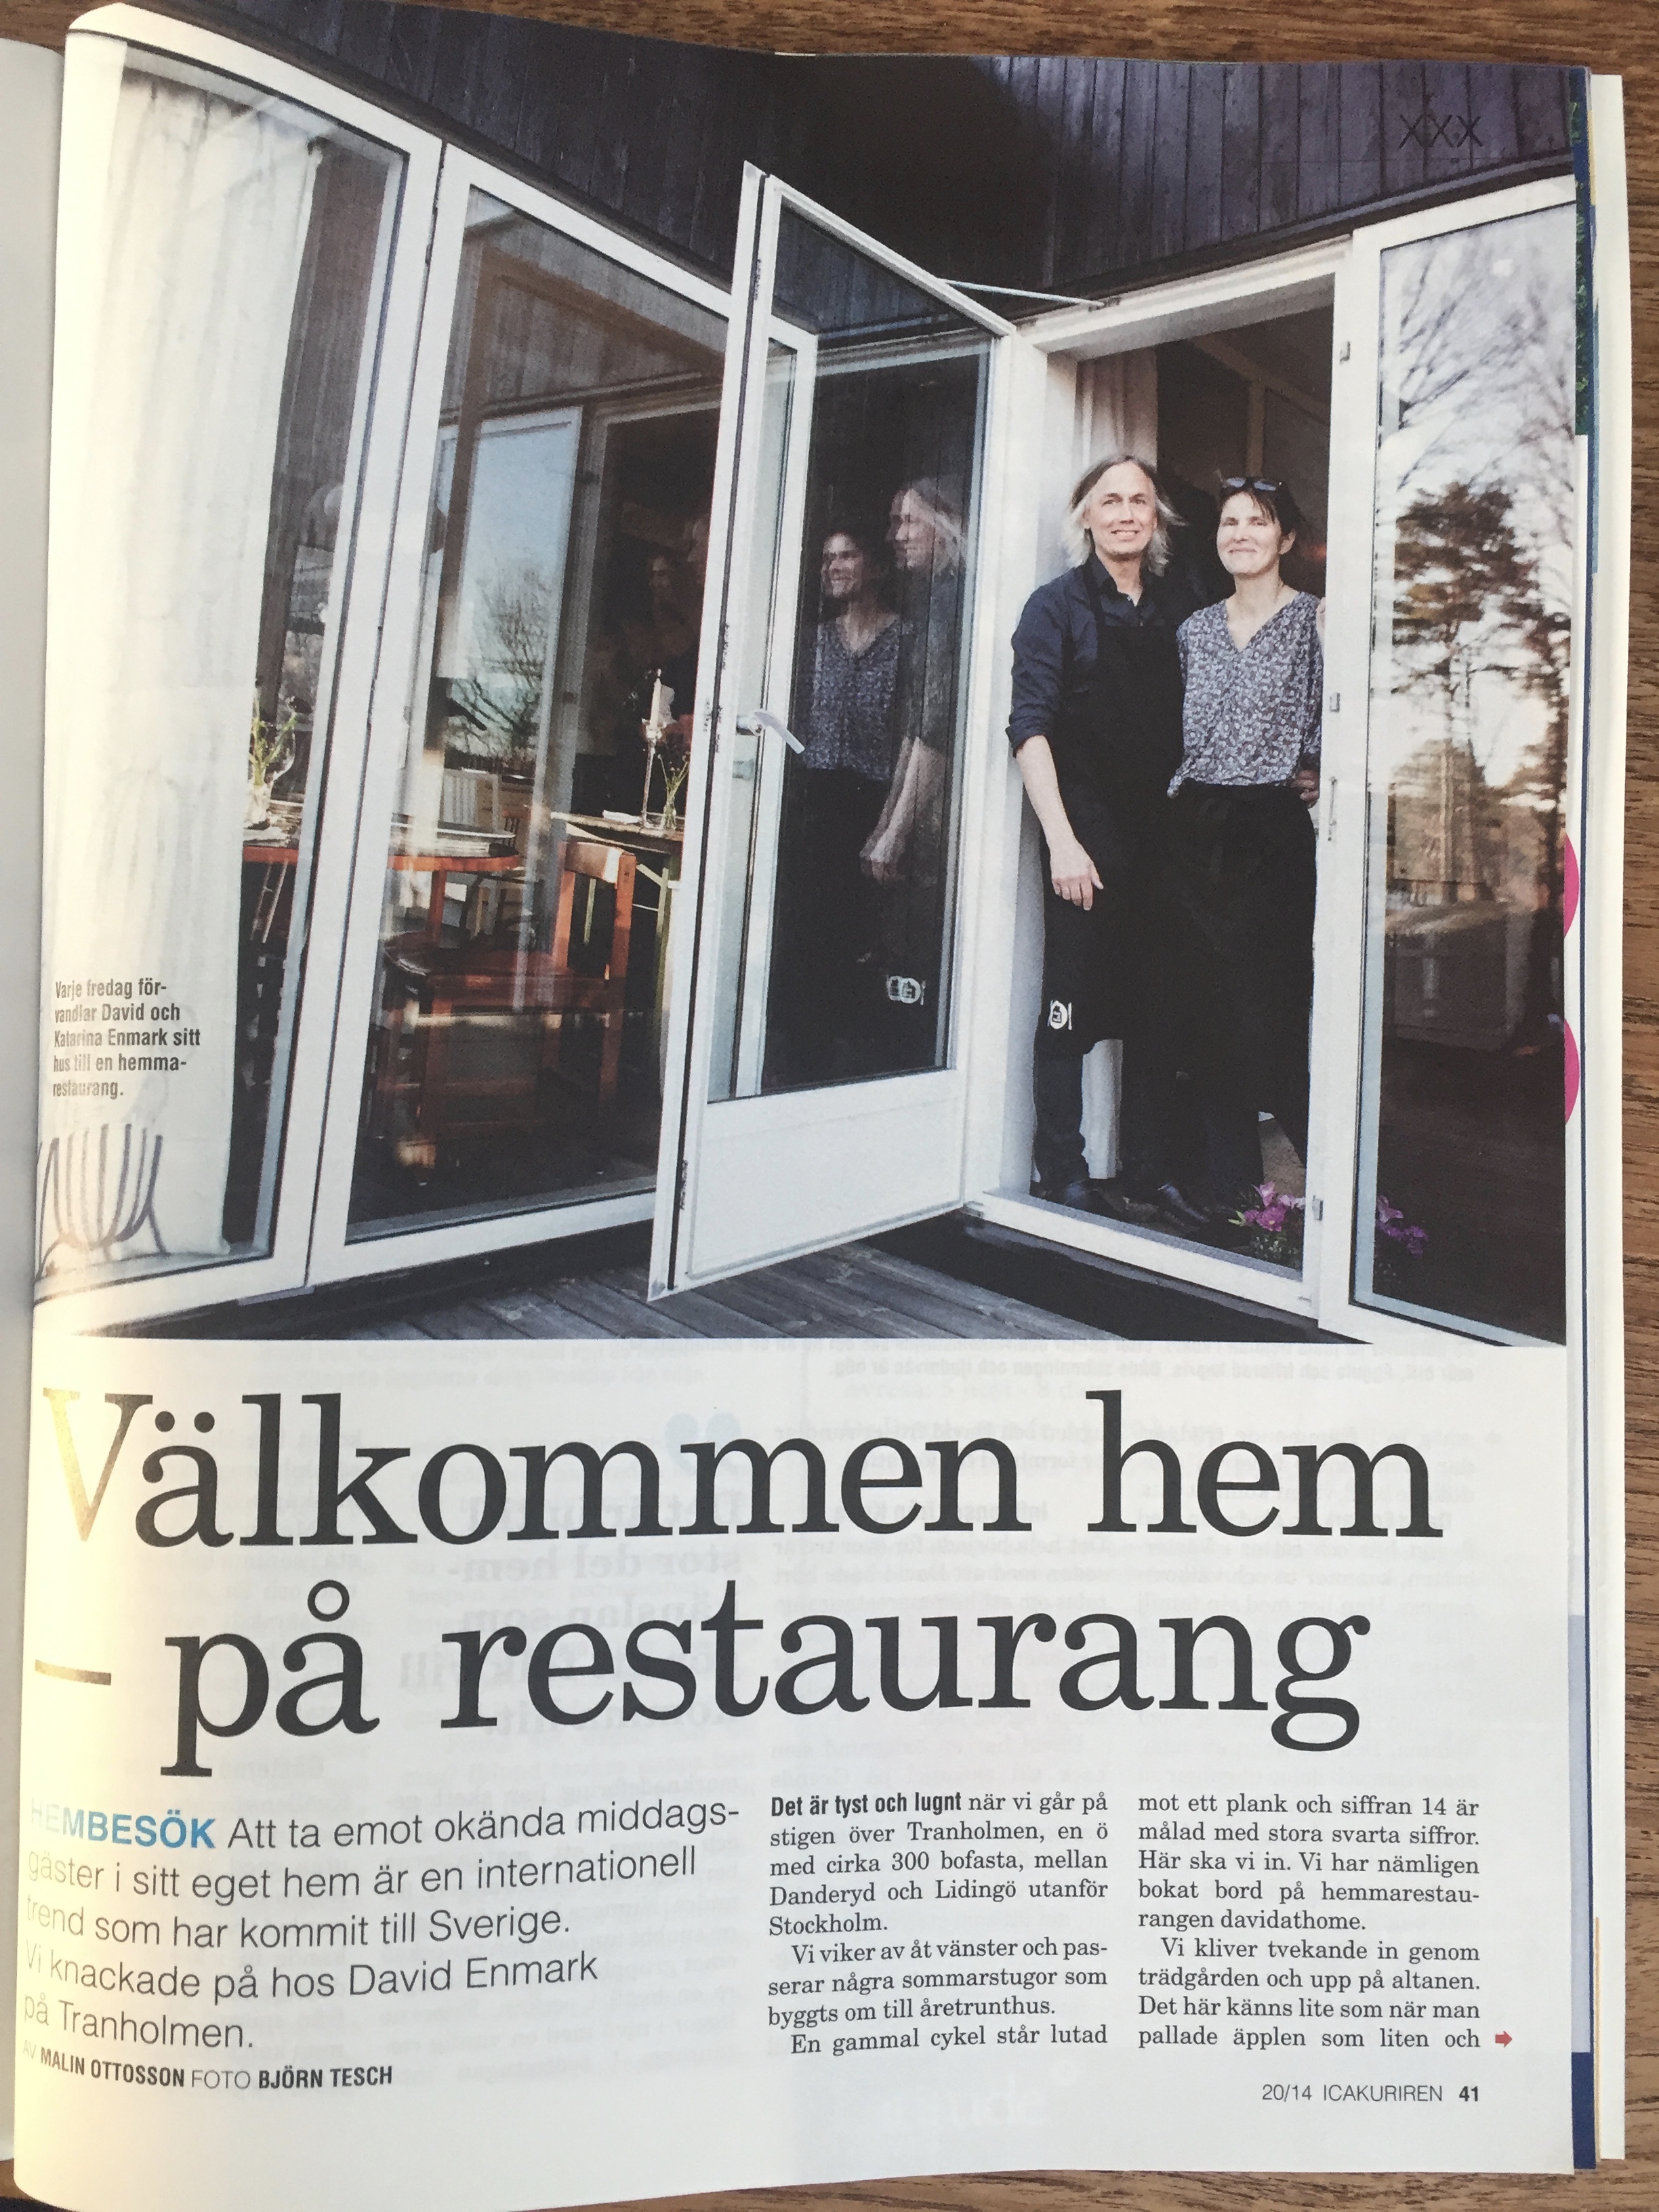  Sweden's most widely read weekly magazine Icakuriren visits